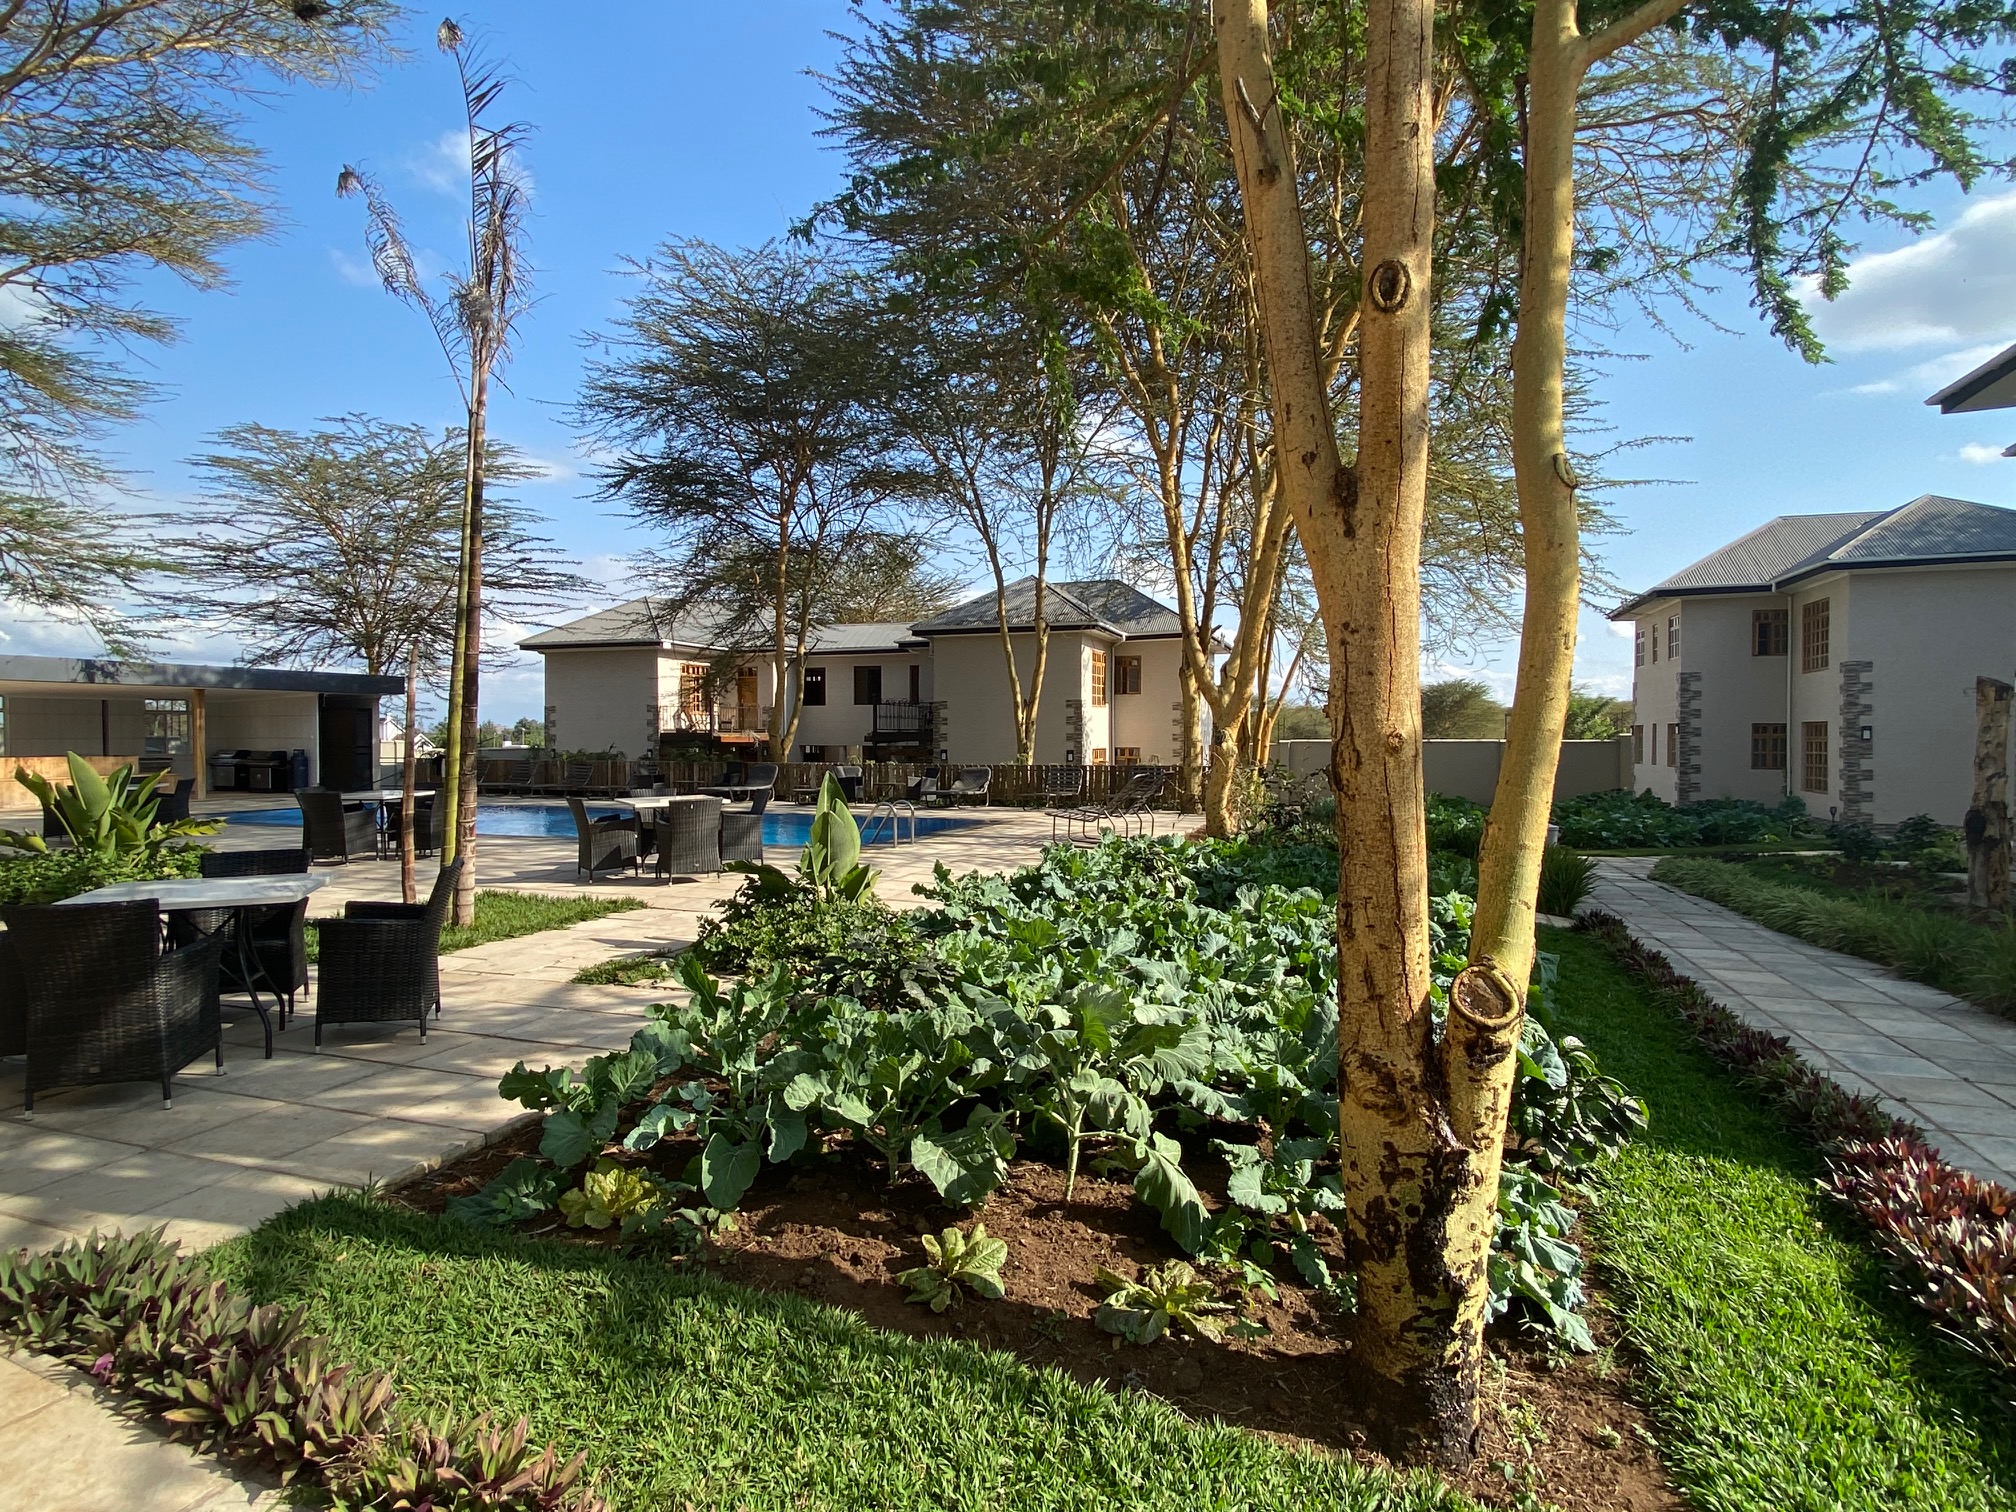 Lodges in Arusha